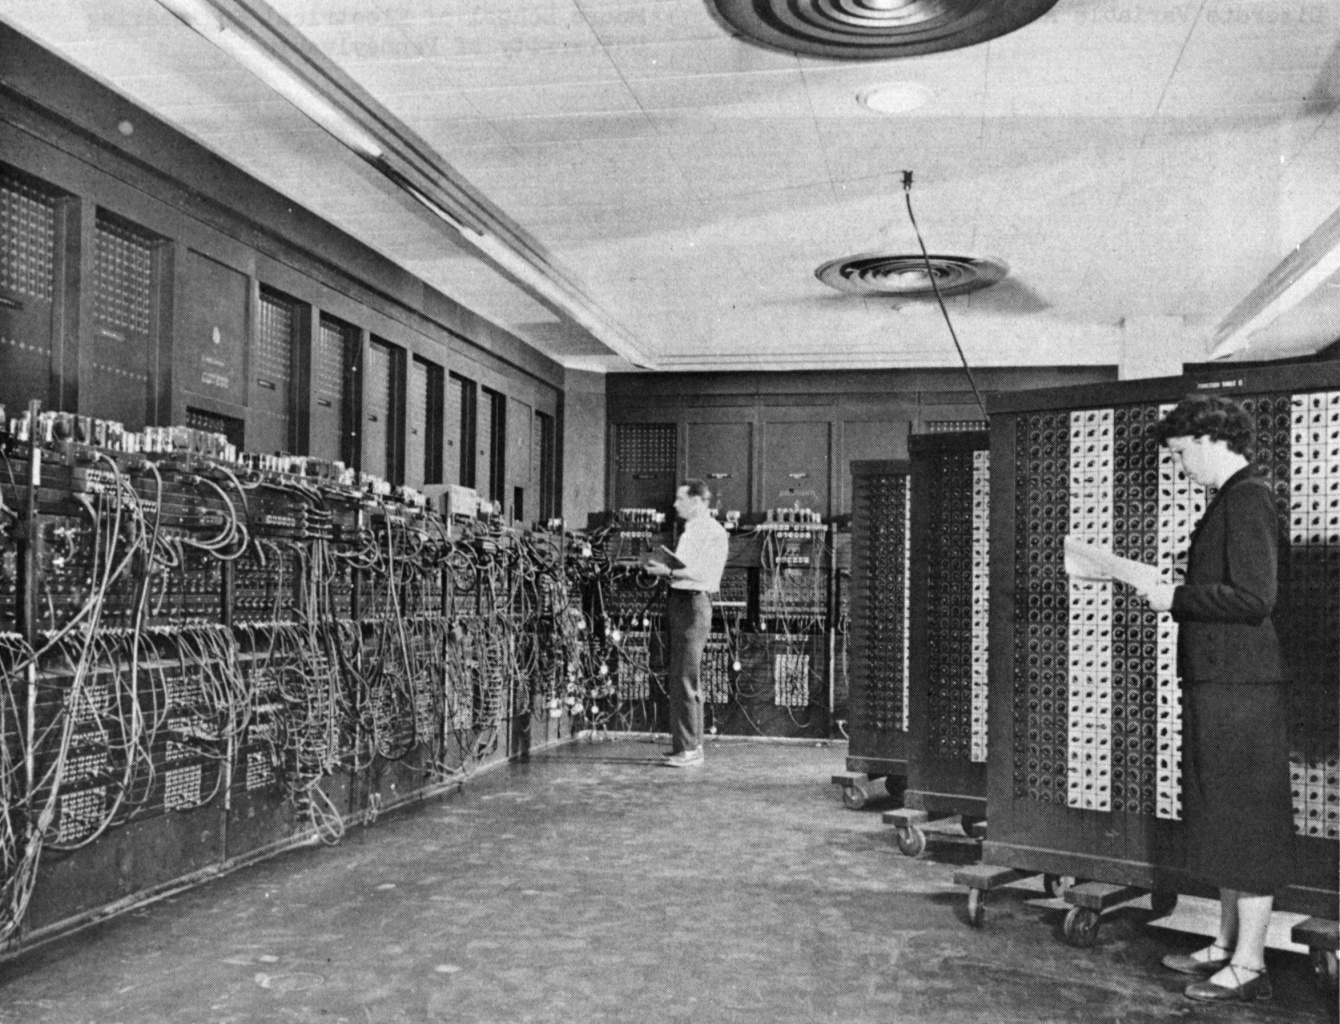 Glen Beck (background) and Betty Snyder (foreground) program the ENIAC in building 328 at the Ballistic Research Laboratory (BRL)